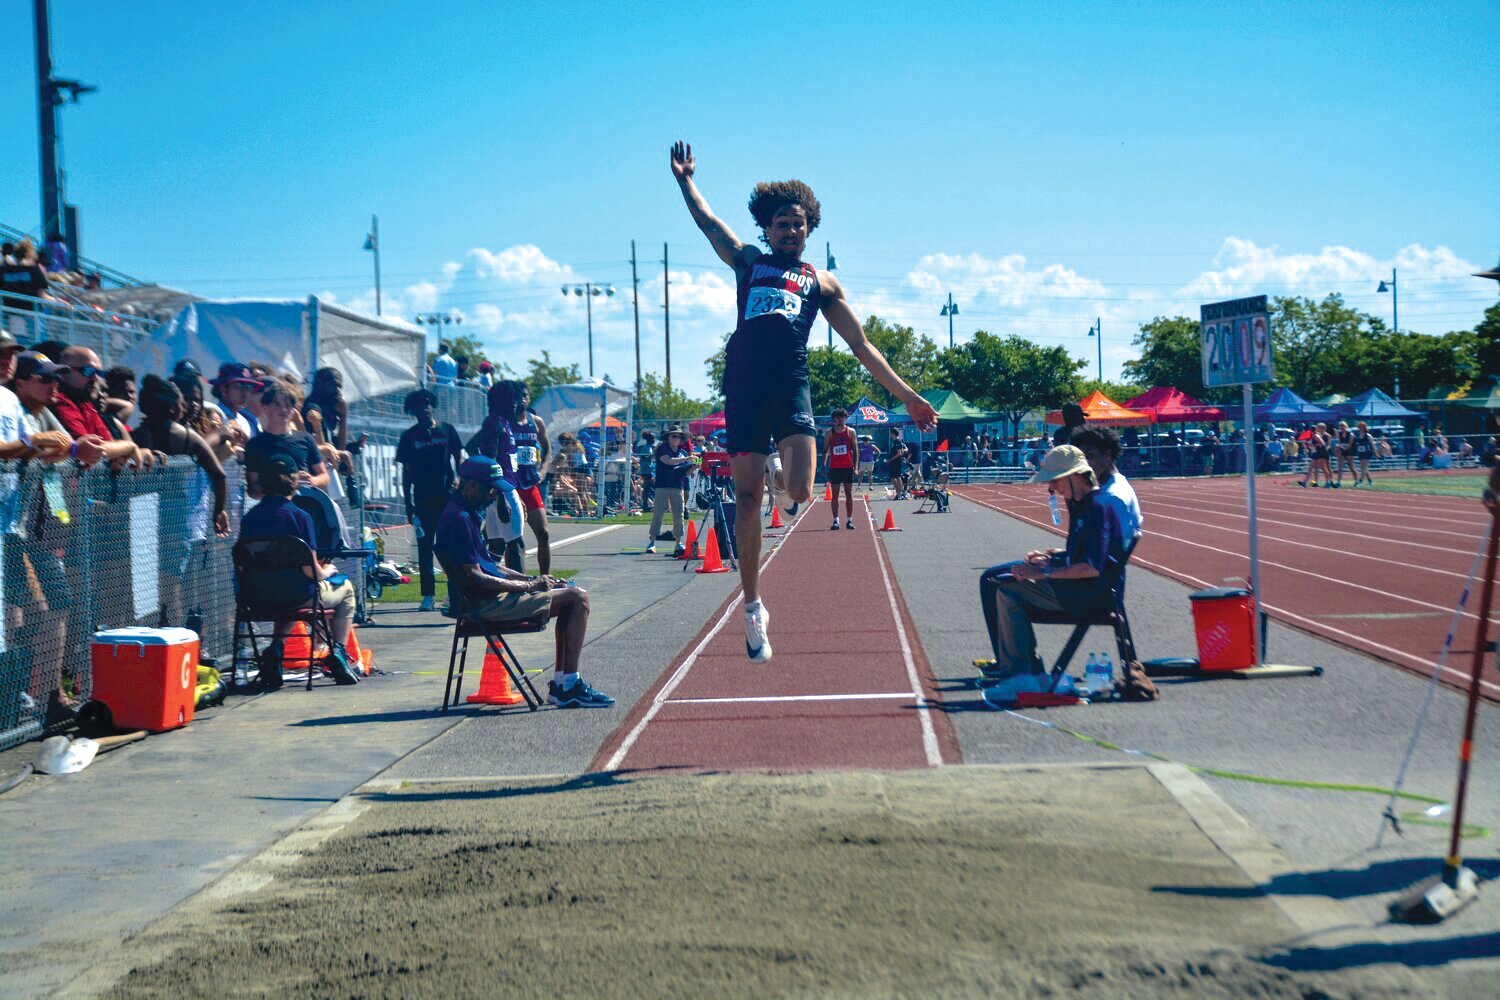 Trevontay Smith was the runner up in the 3A long jump competition after a leap of 22 feet and 4 inches.